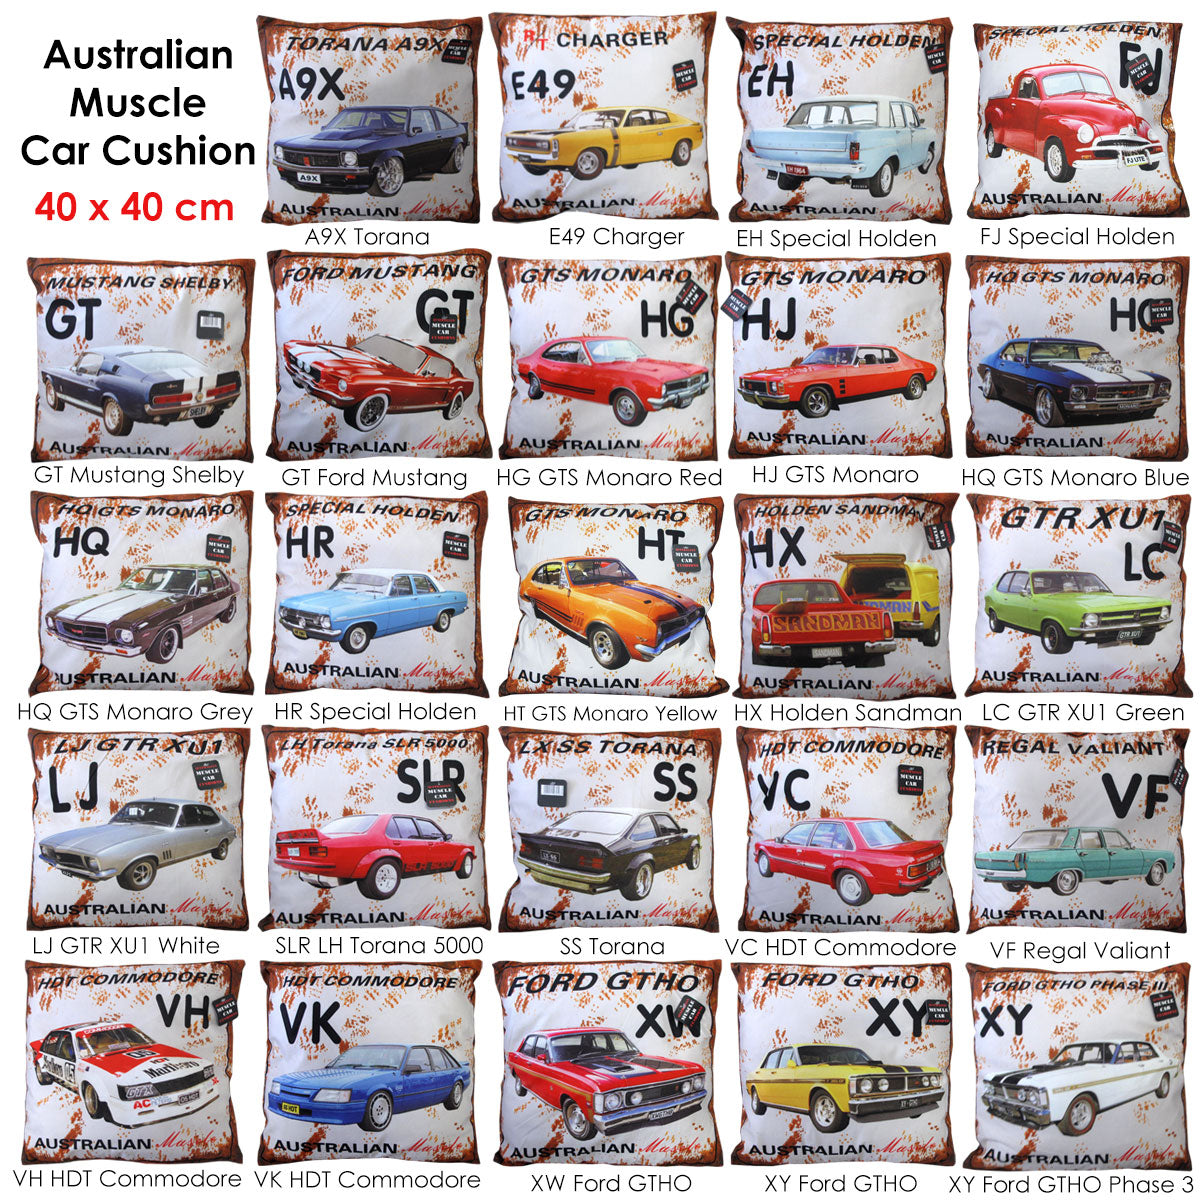 Australian Muscle Car Cushion FJ Special Holden Red